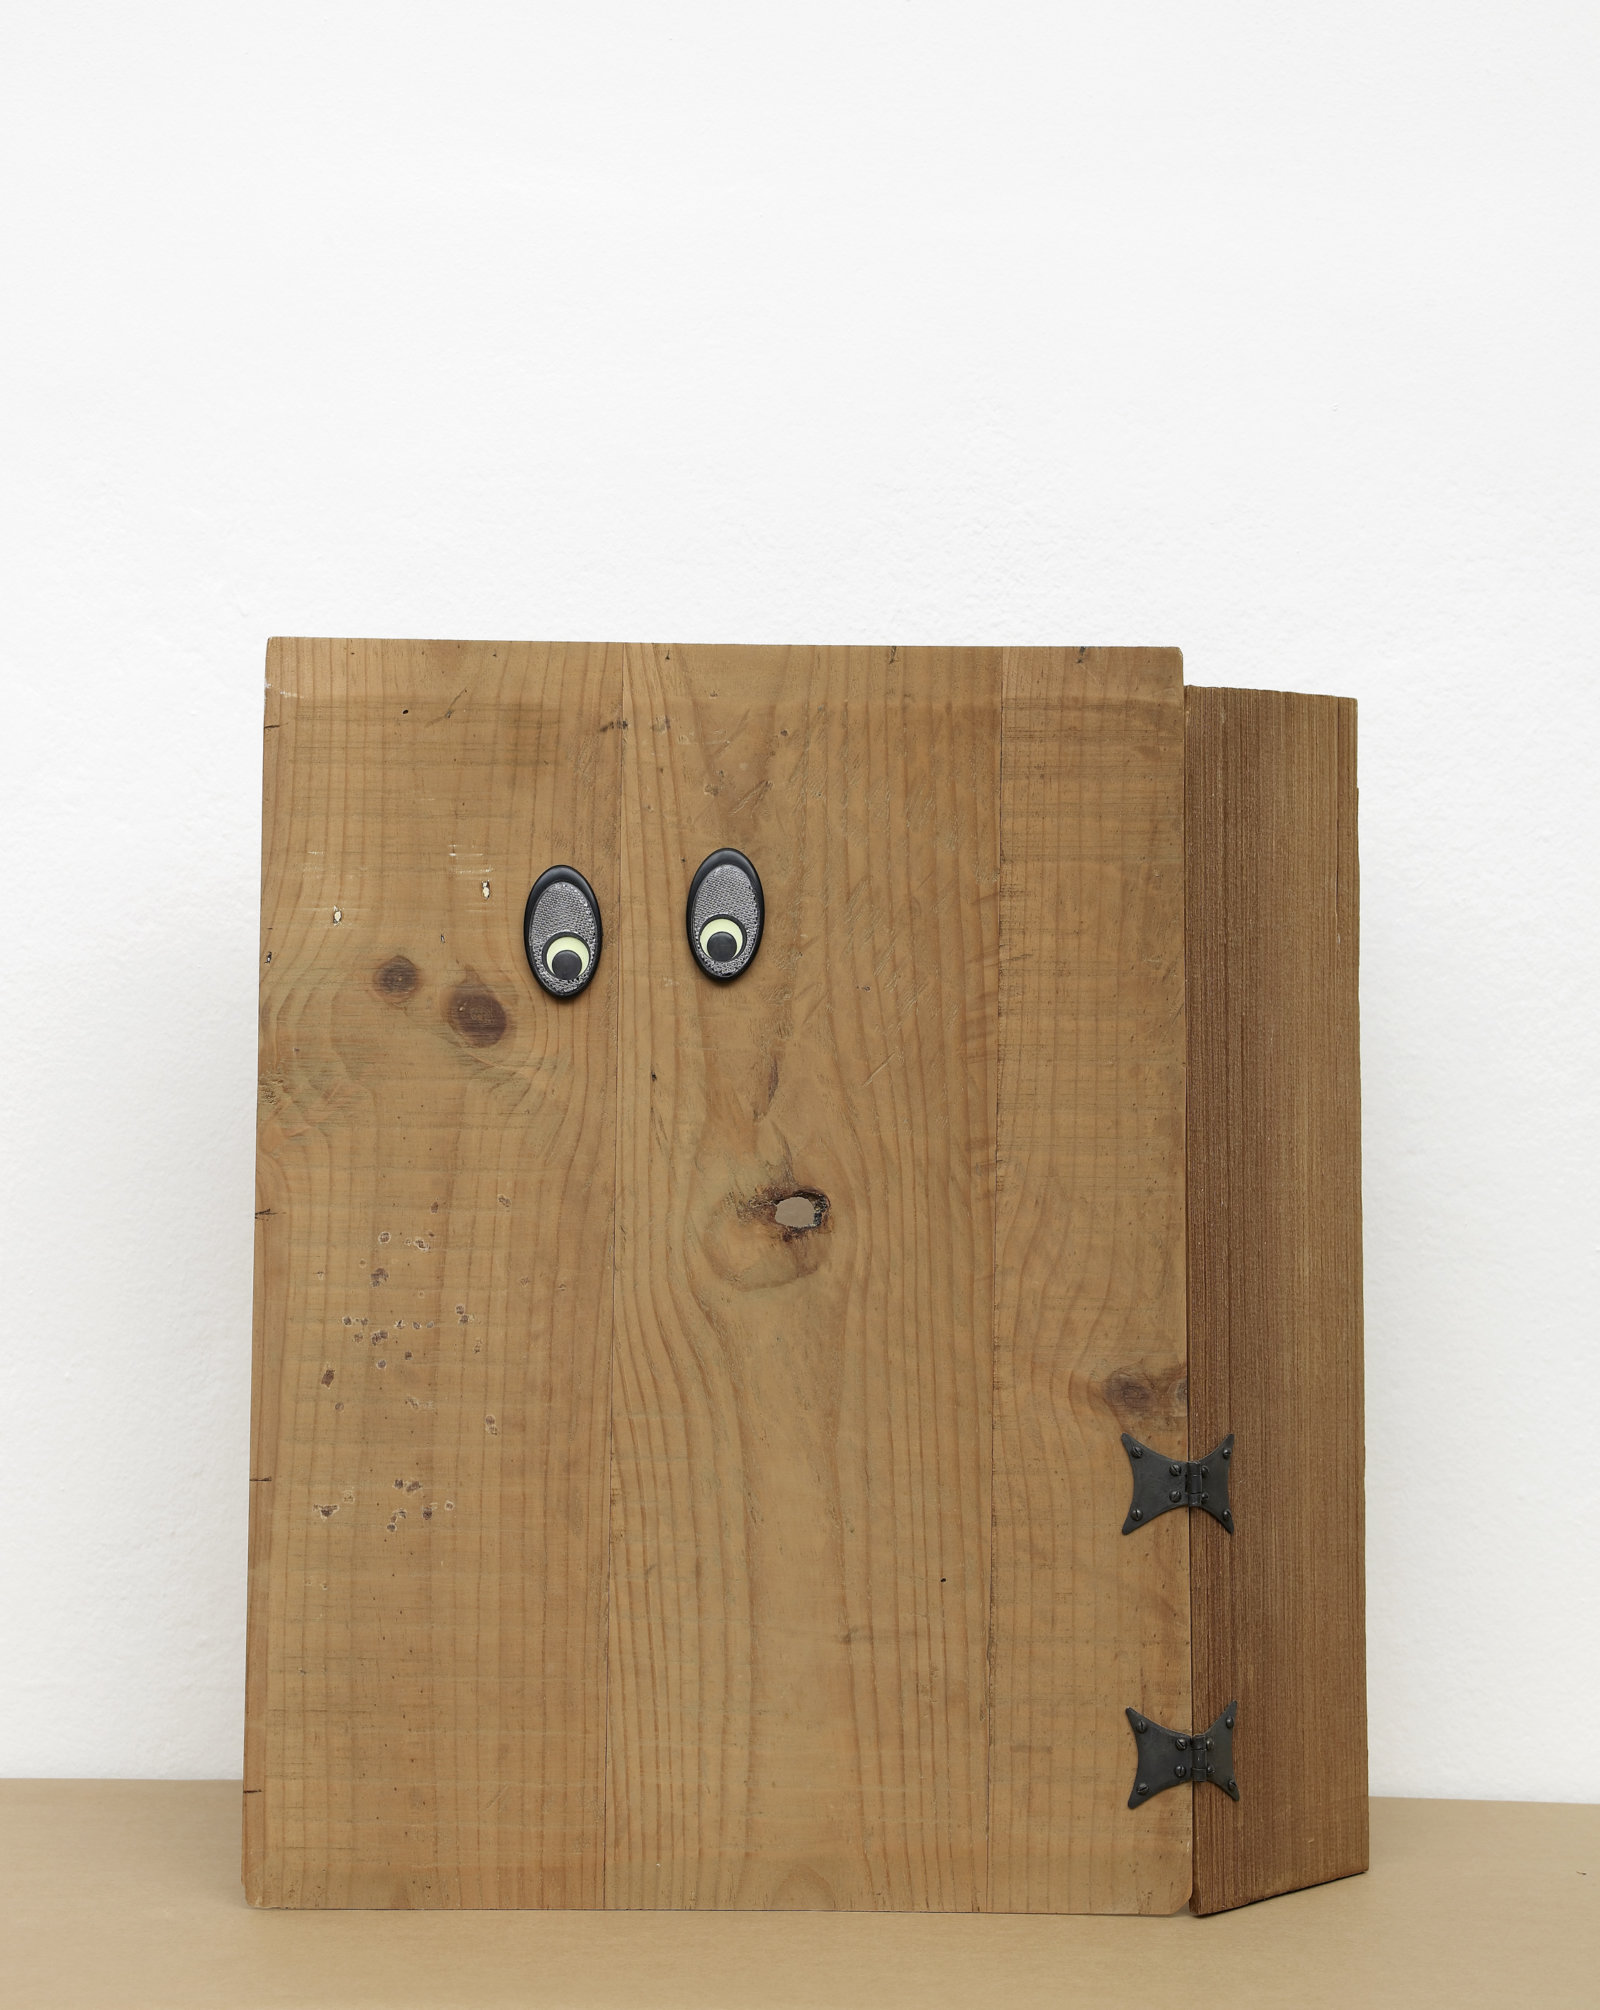 Christina Mackie, Trestle People, 2012, mixed media, dimensions variable. Installation view, Painting the Weights, Chisenhale Gallery, London, UK, 2012